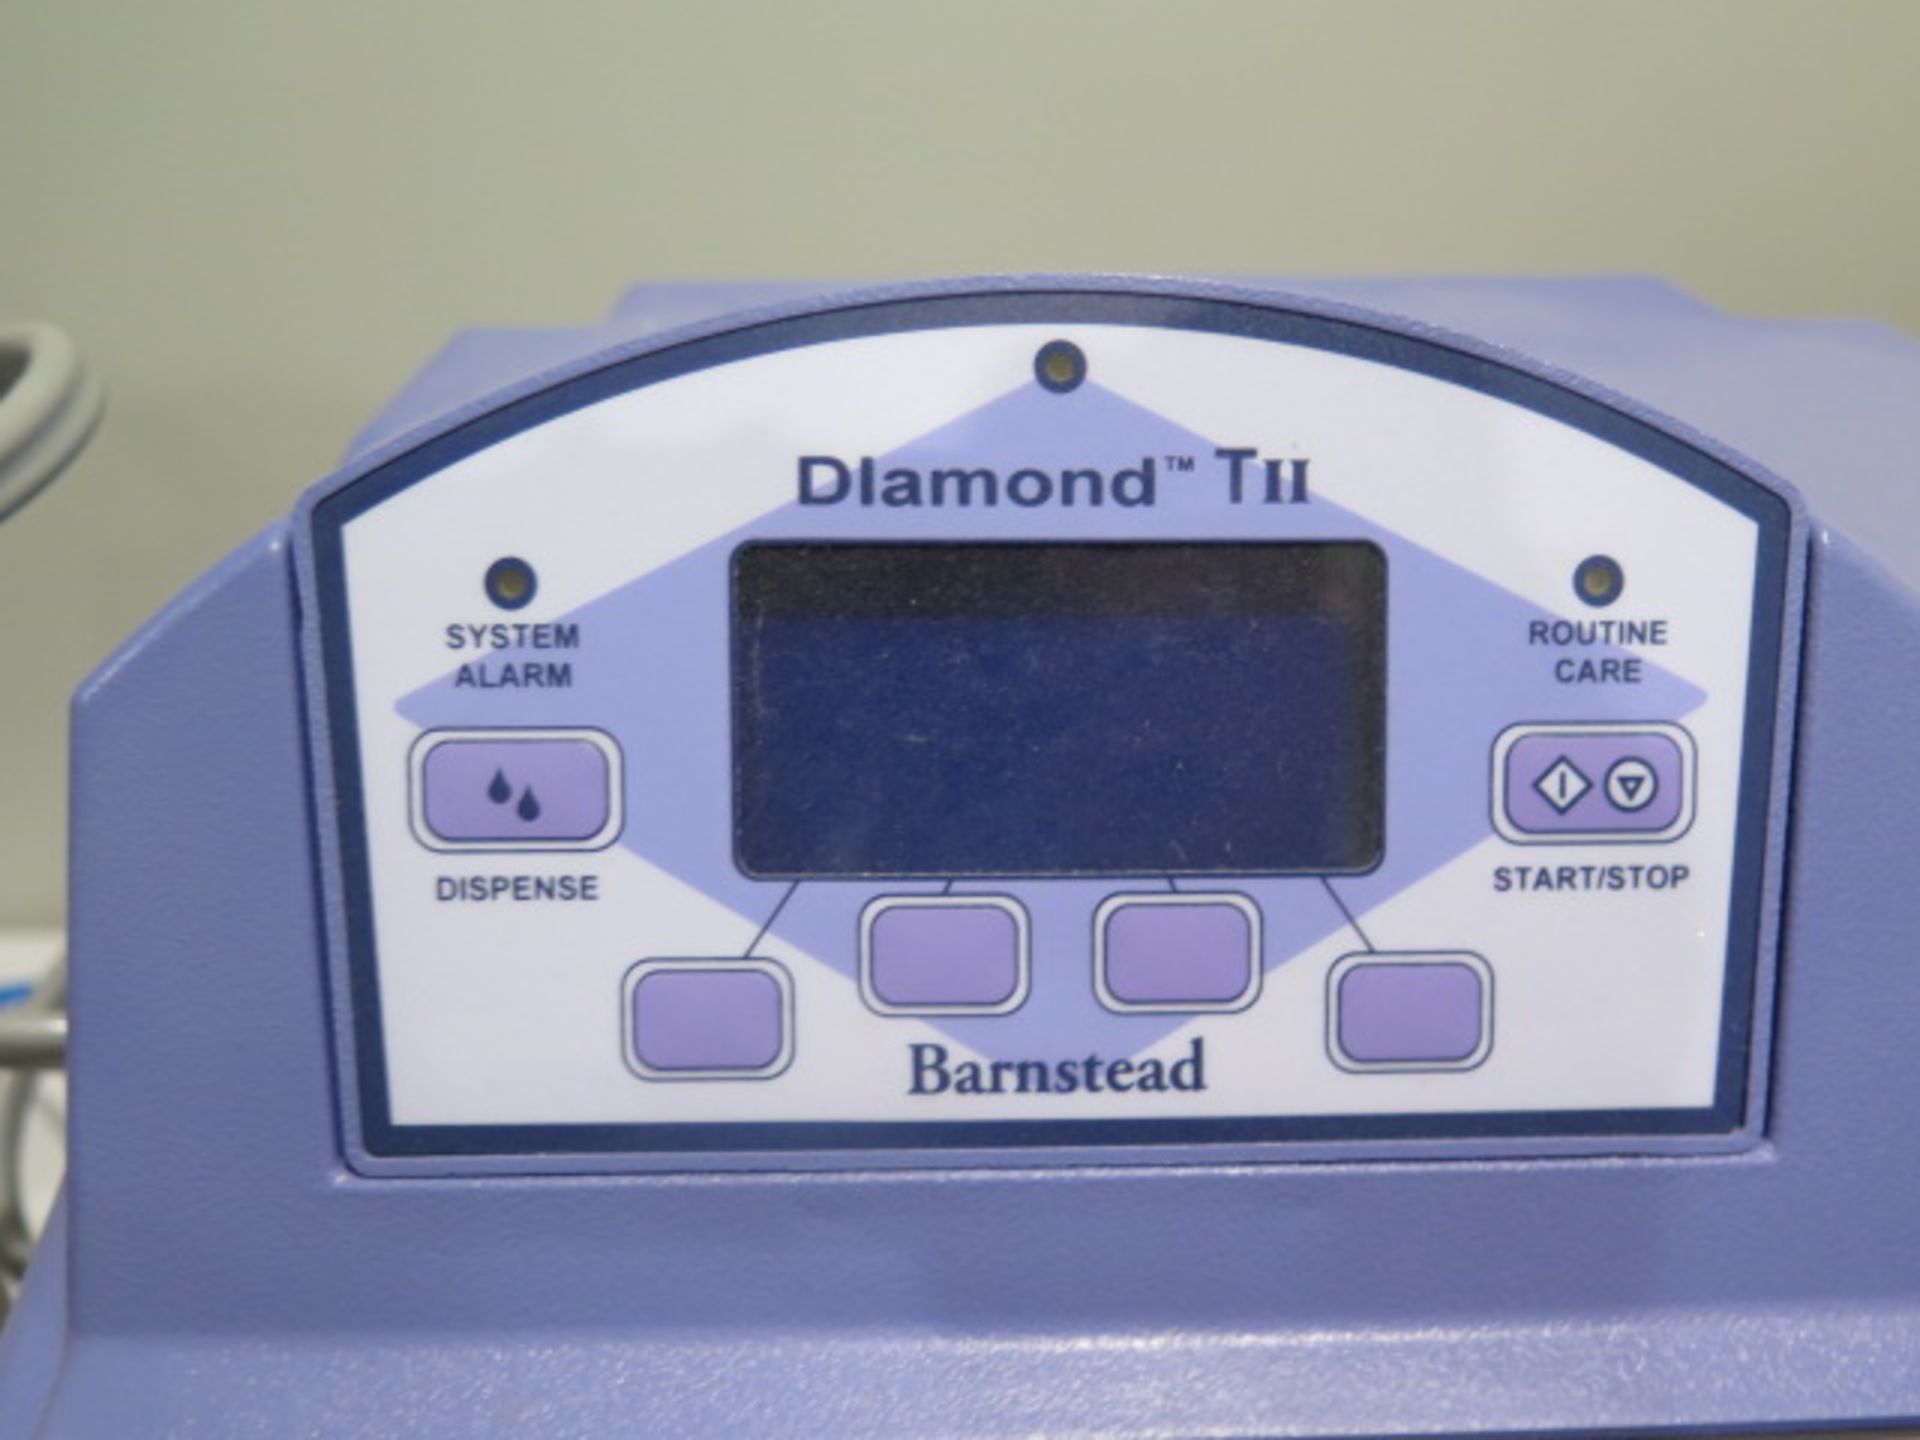 Barnstead NANOpure Diamond Water Purification System w/ TS Accudispense Volumetric Disp, SOLD AS IS - Image 9 of 10